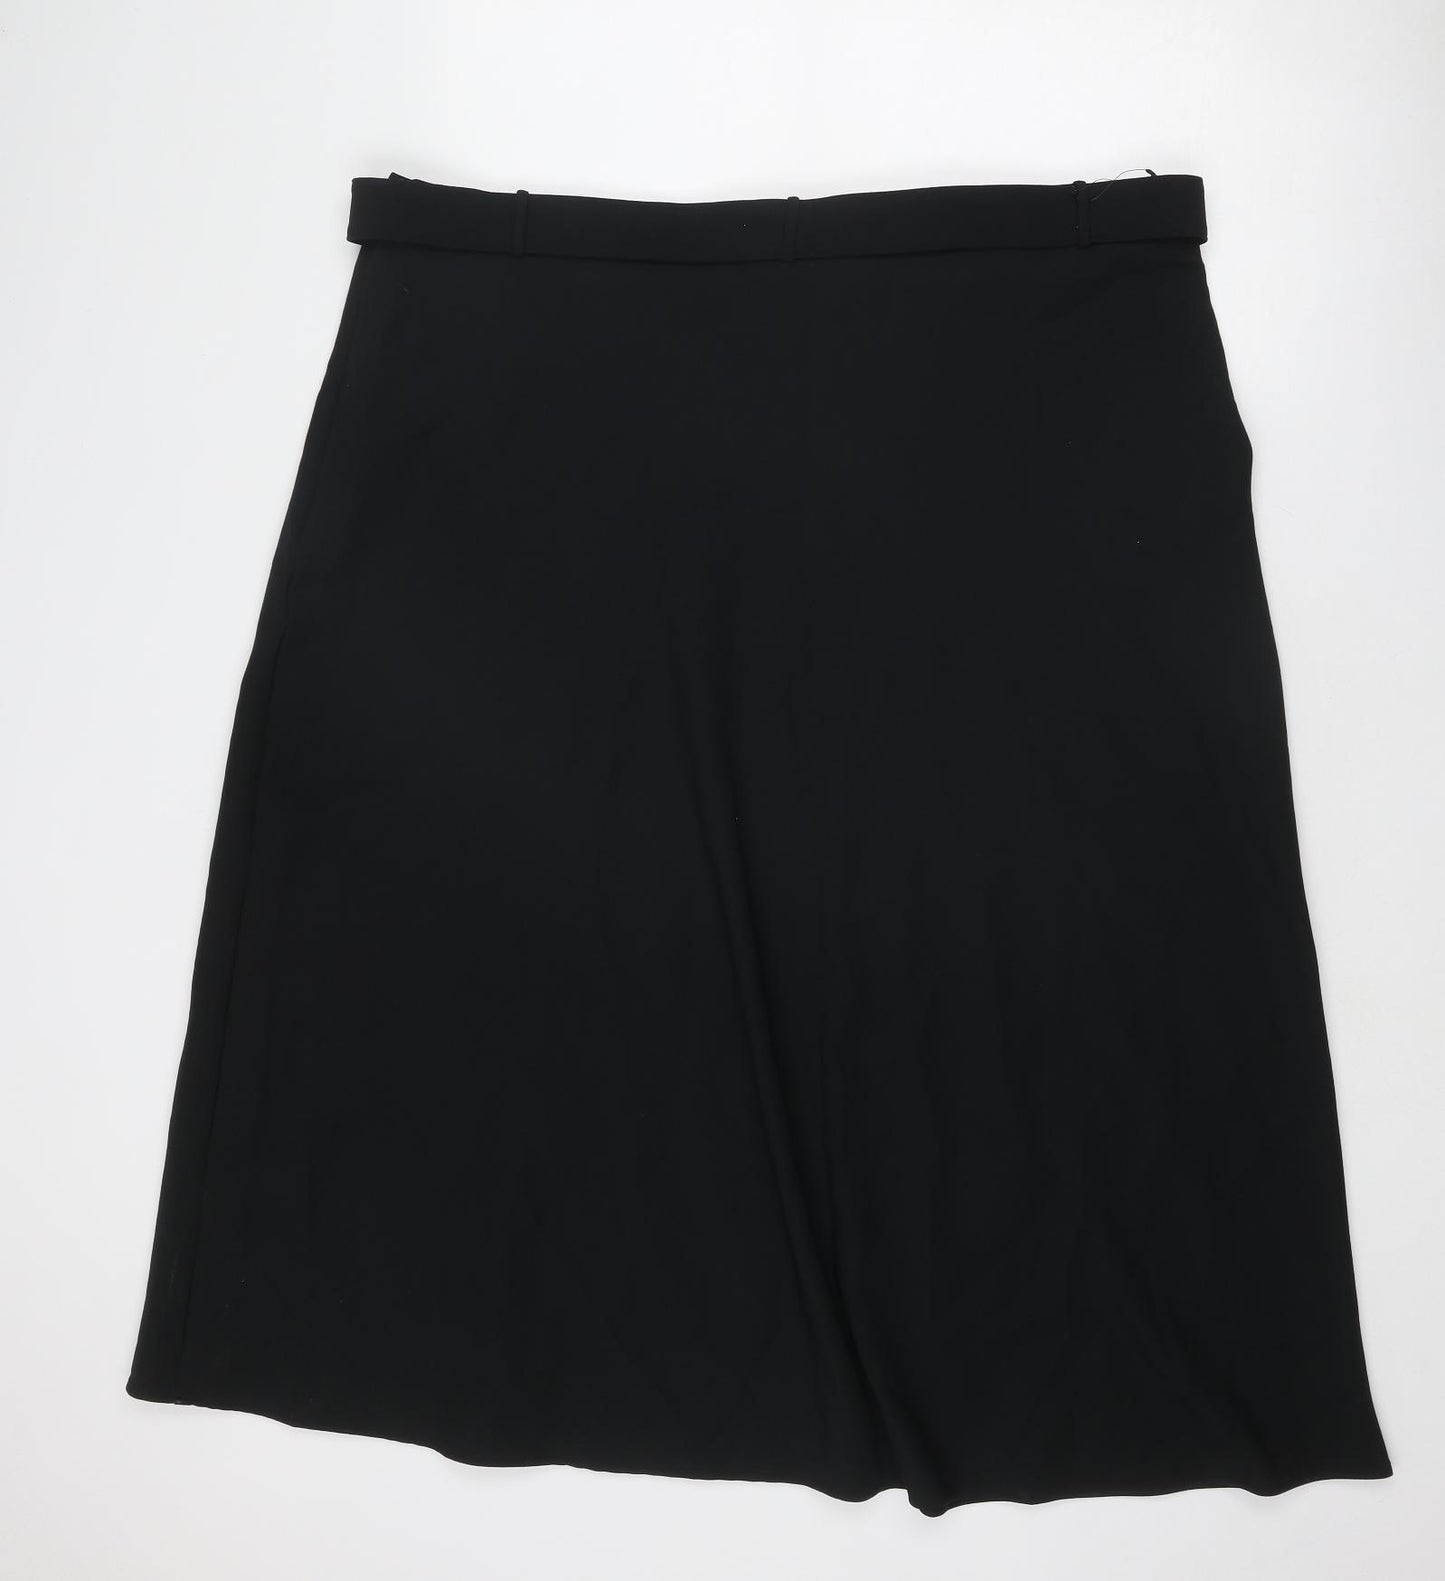 Marks and Spencer Womens Black Polyester Swing Skirt Size 22 Zip - Belt Included